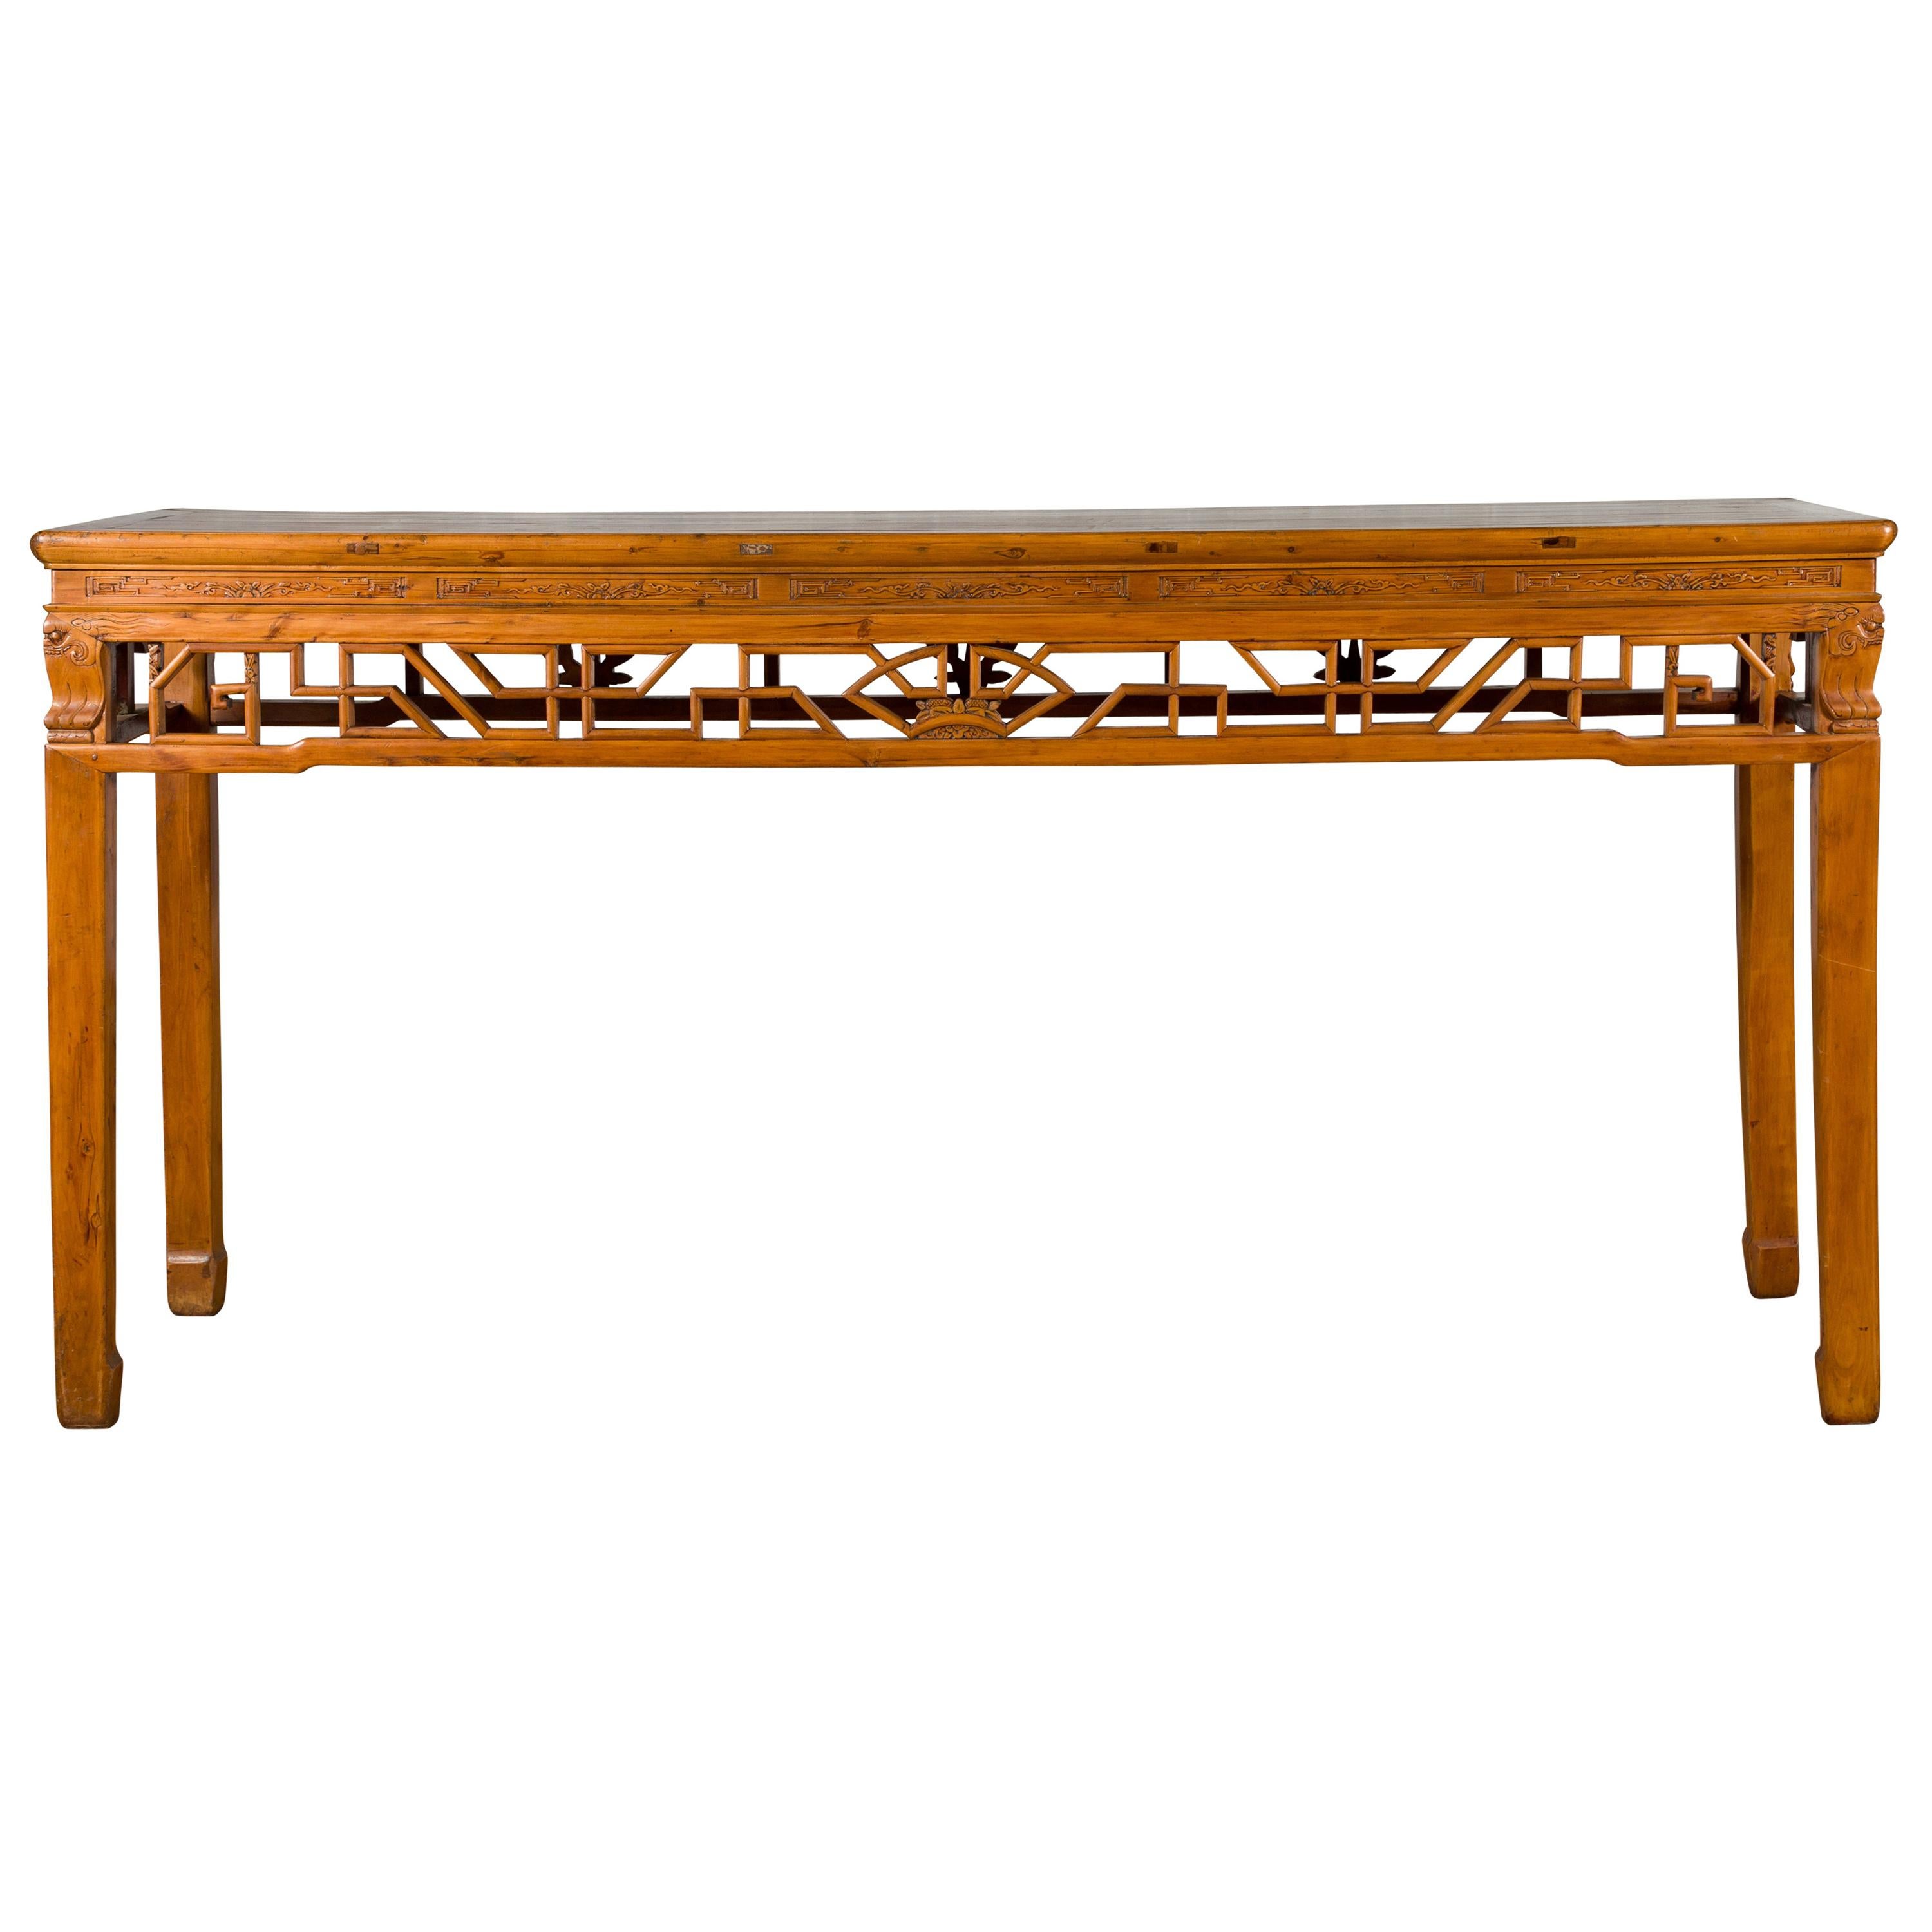 19th Century Chinese Qing Dynasty Period Altar Console Table with Carved Apron